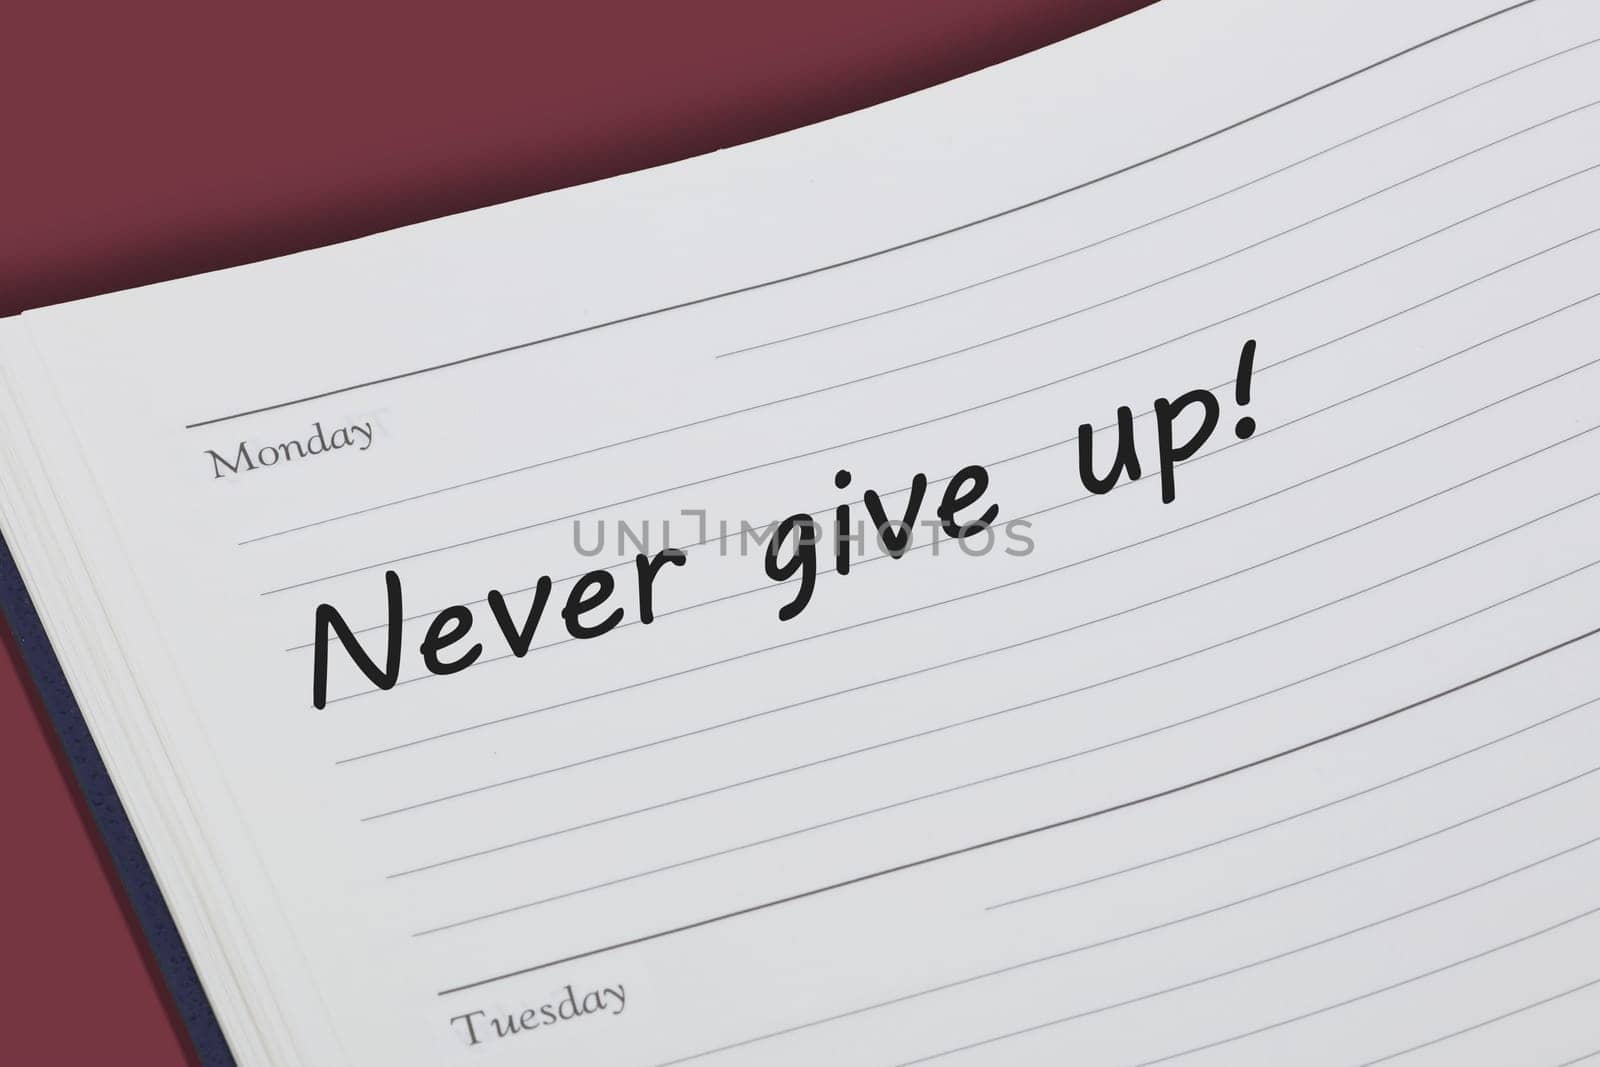 A Never give up reminder message in an open diary